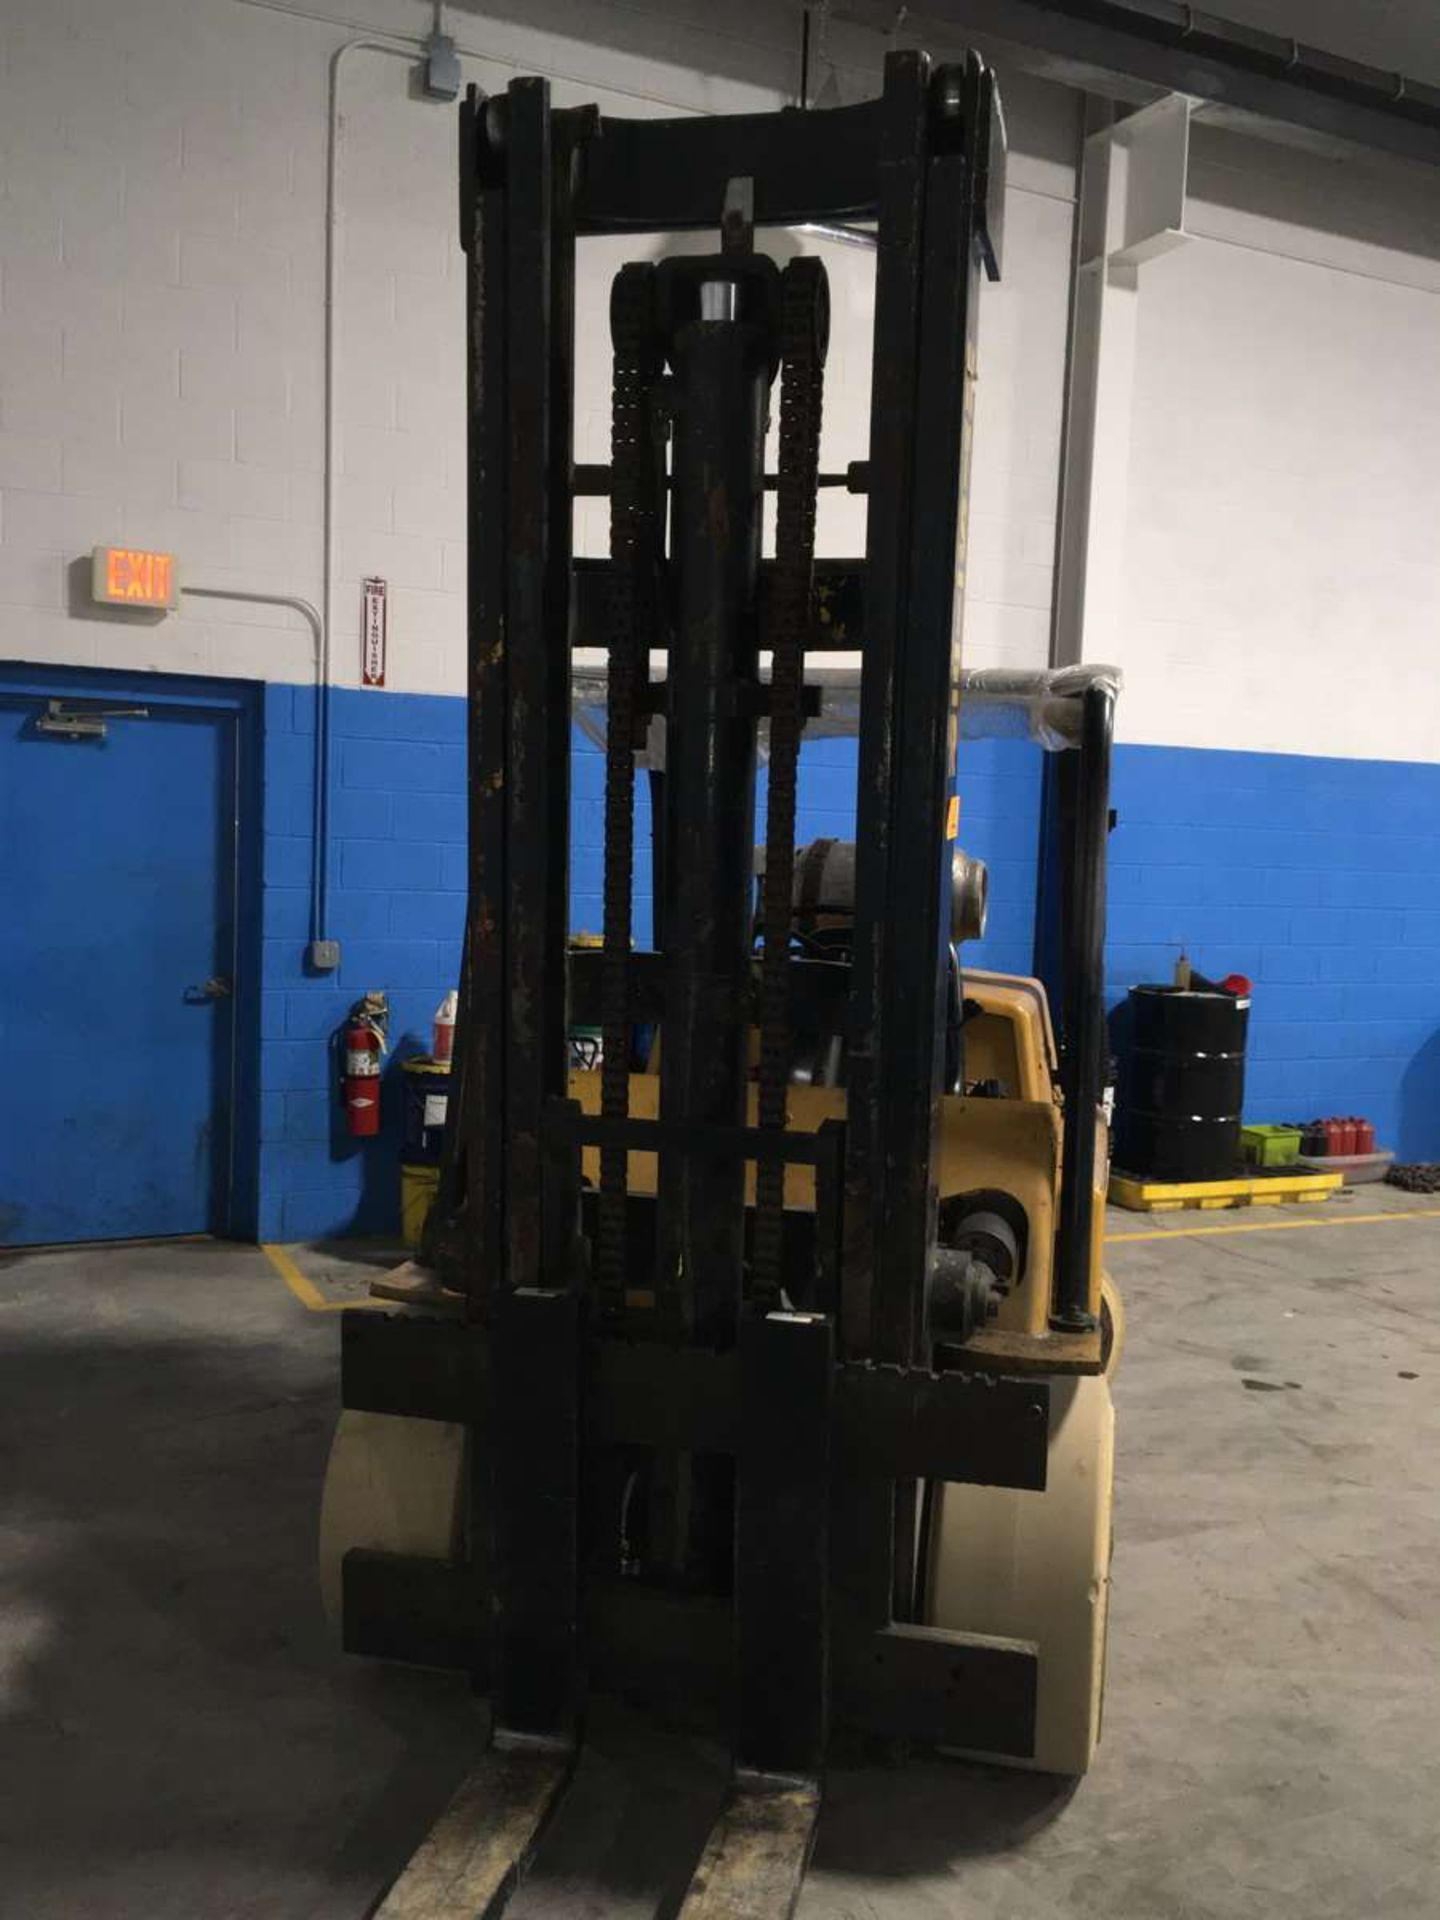 HYSTER S125A 12,500 LB. Capacity Lp Gas Forklift - Image 9 of 16